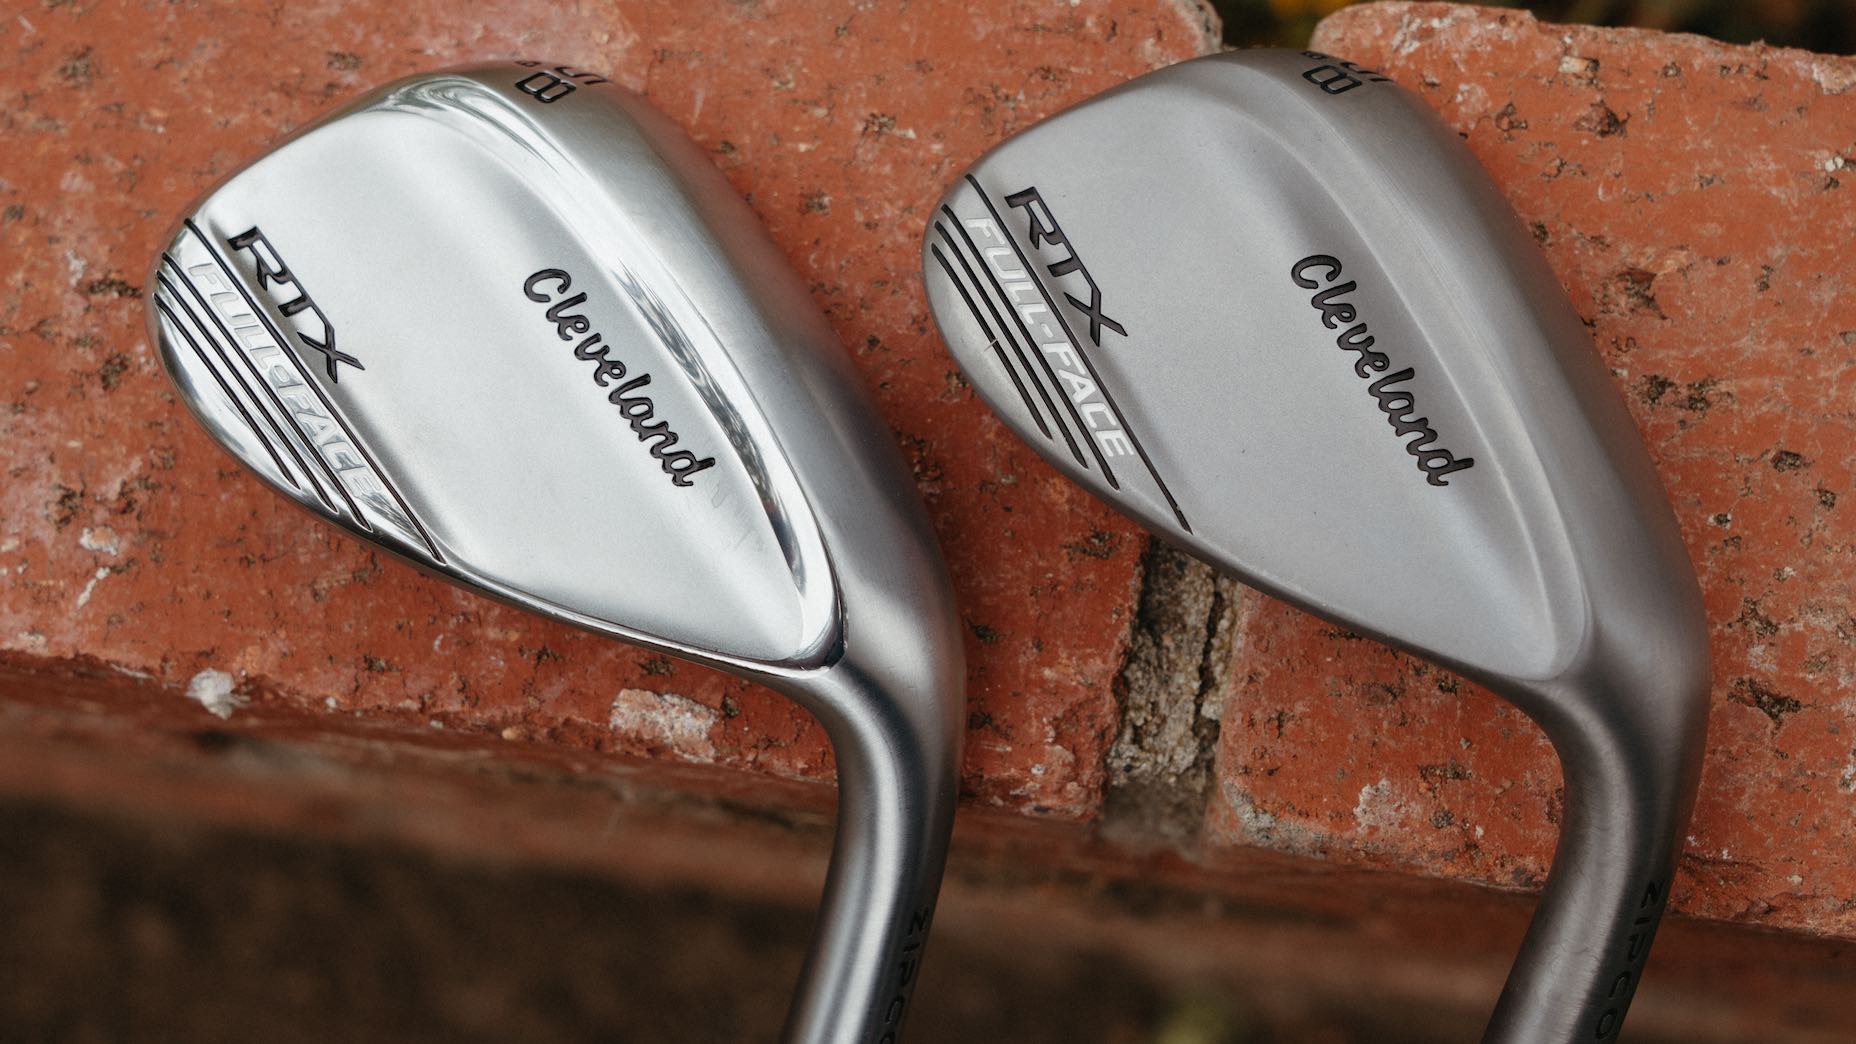 Cleveland Golf's RTX Full-Face wedges: ClubTest First Look